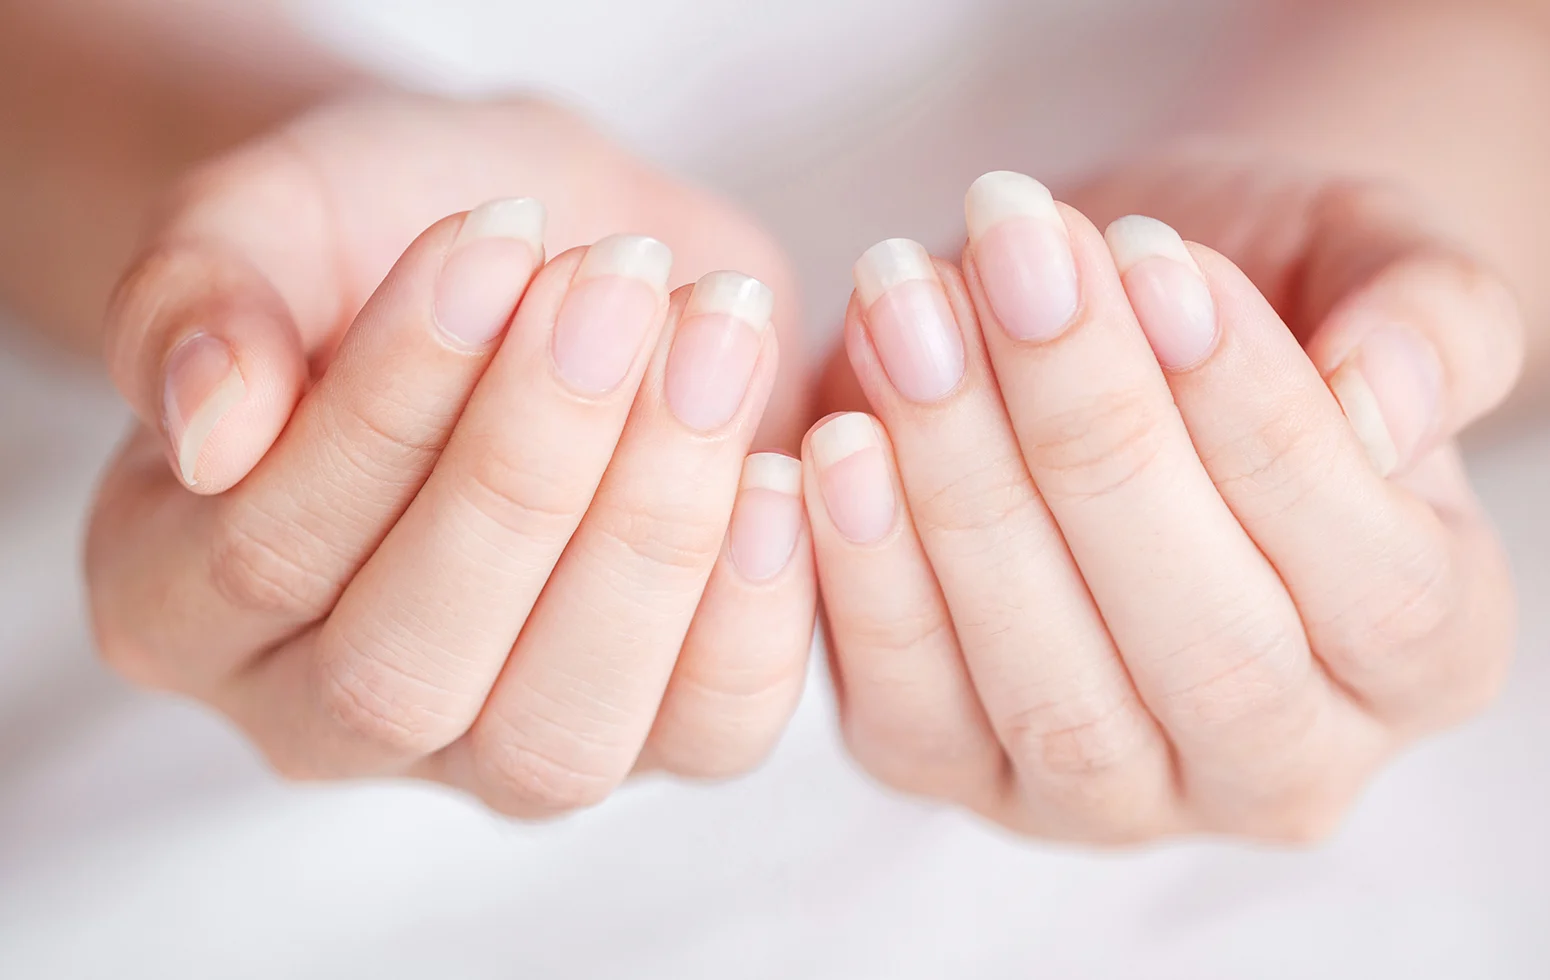 How To Make Your Nails Grow Faster